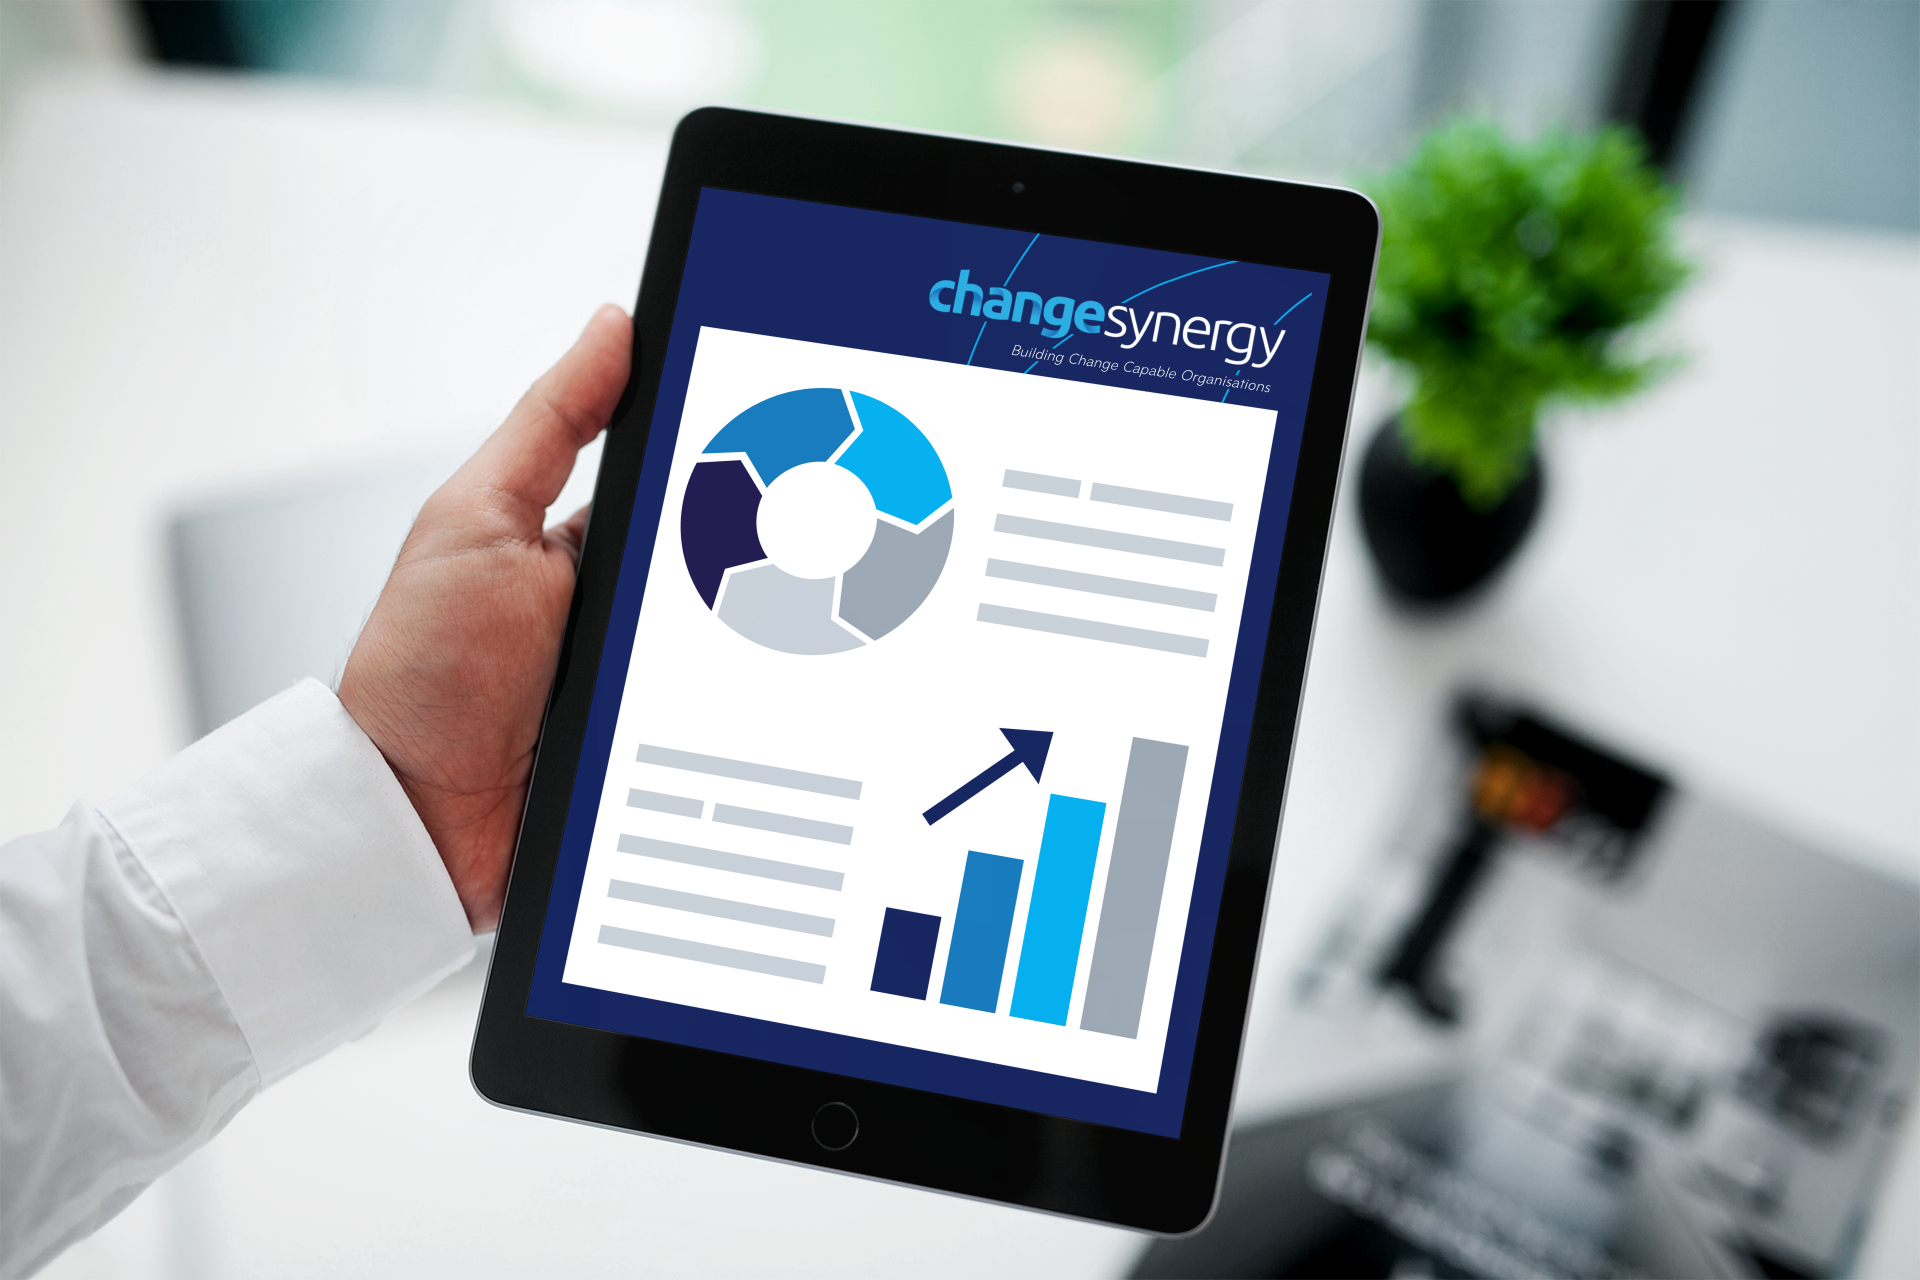 White Paper: Characteristics of Truly Change Capable Organisations